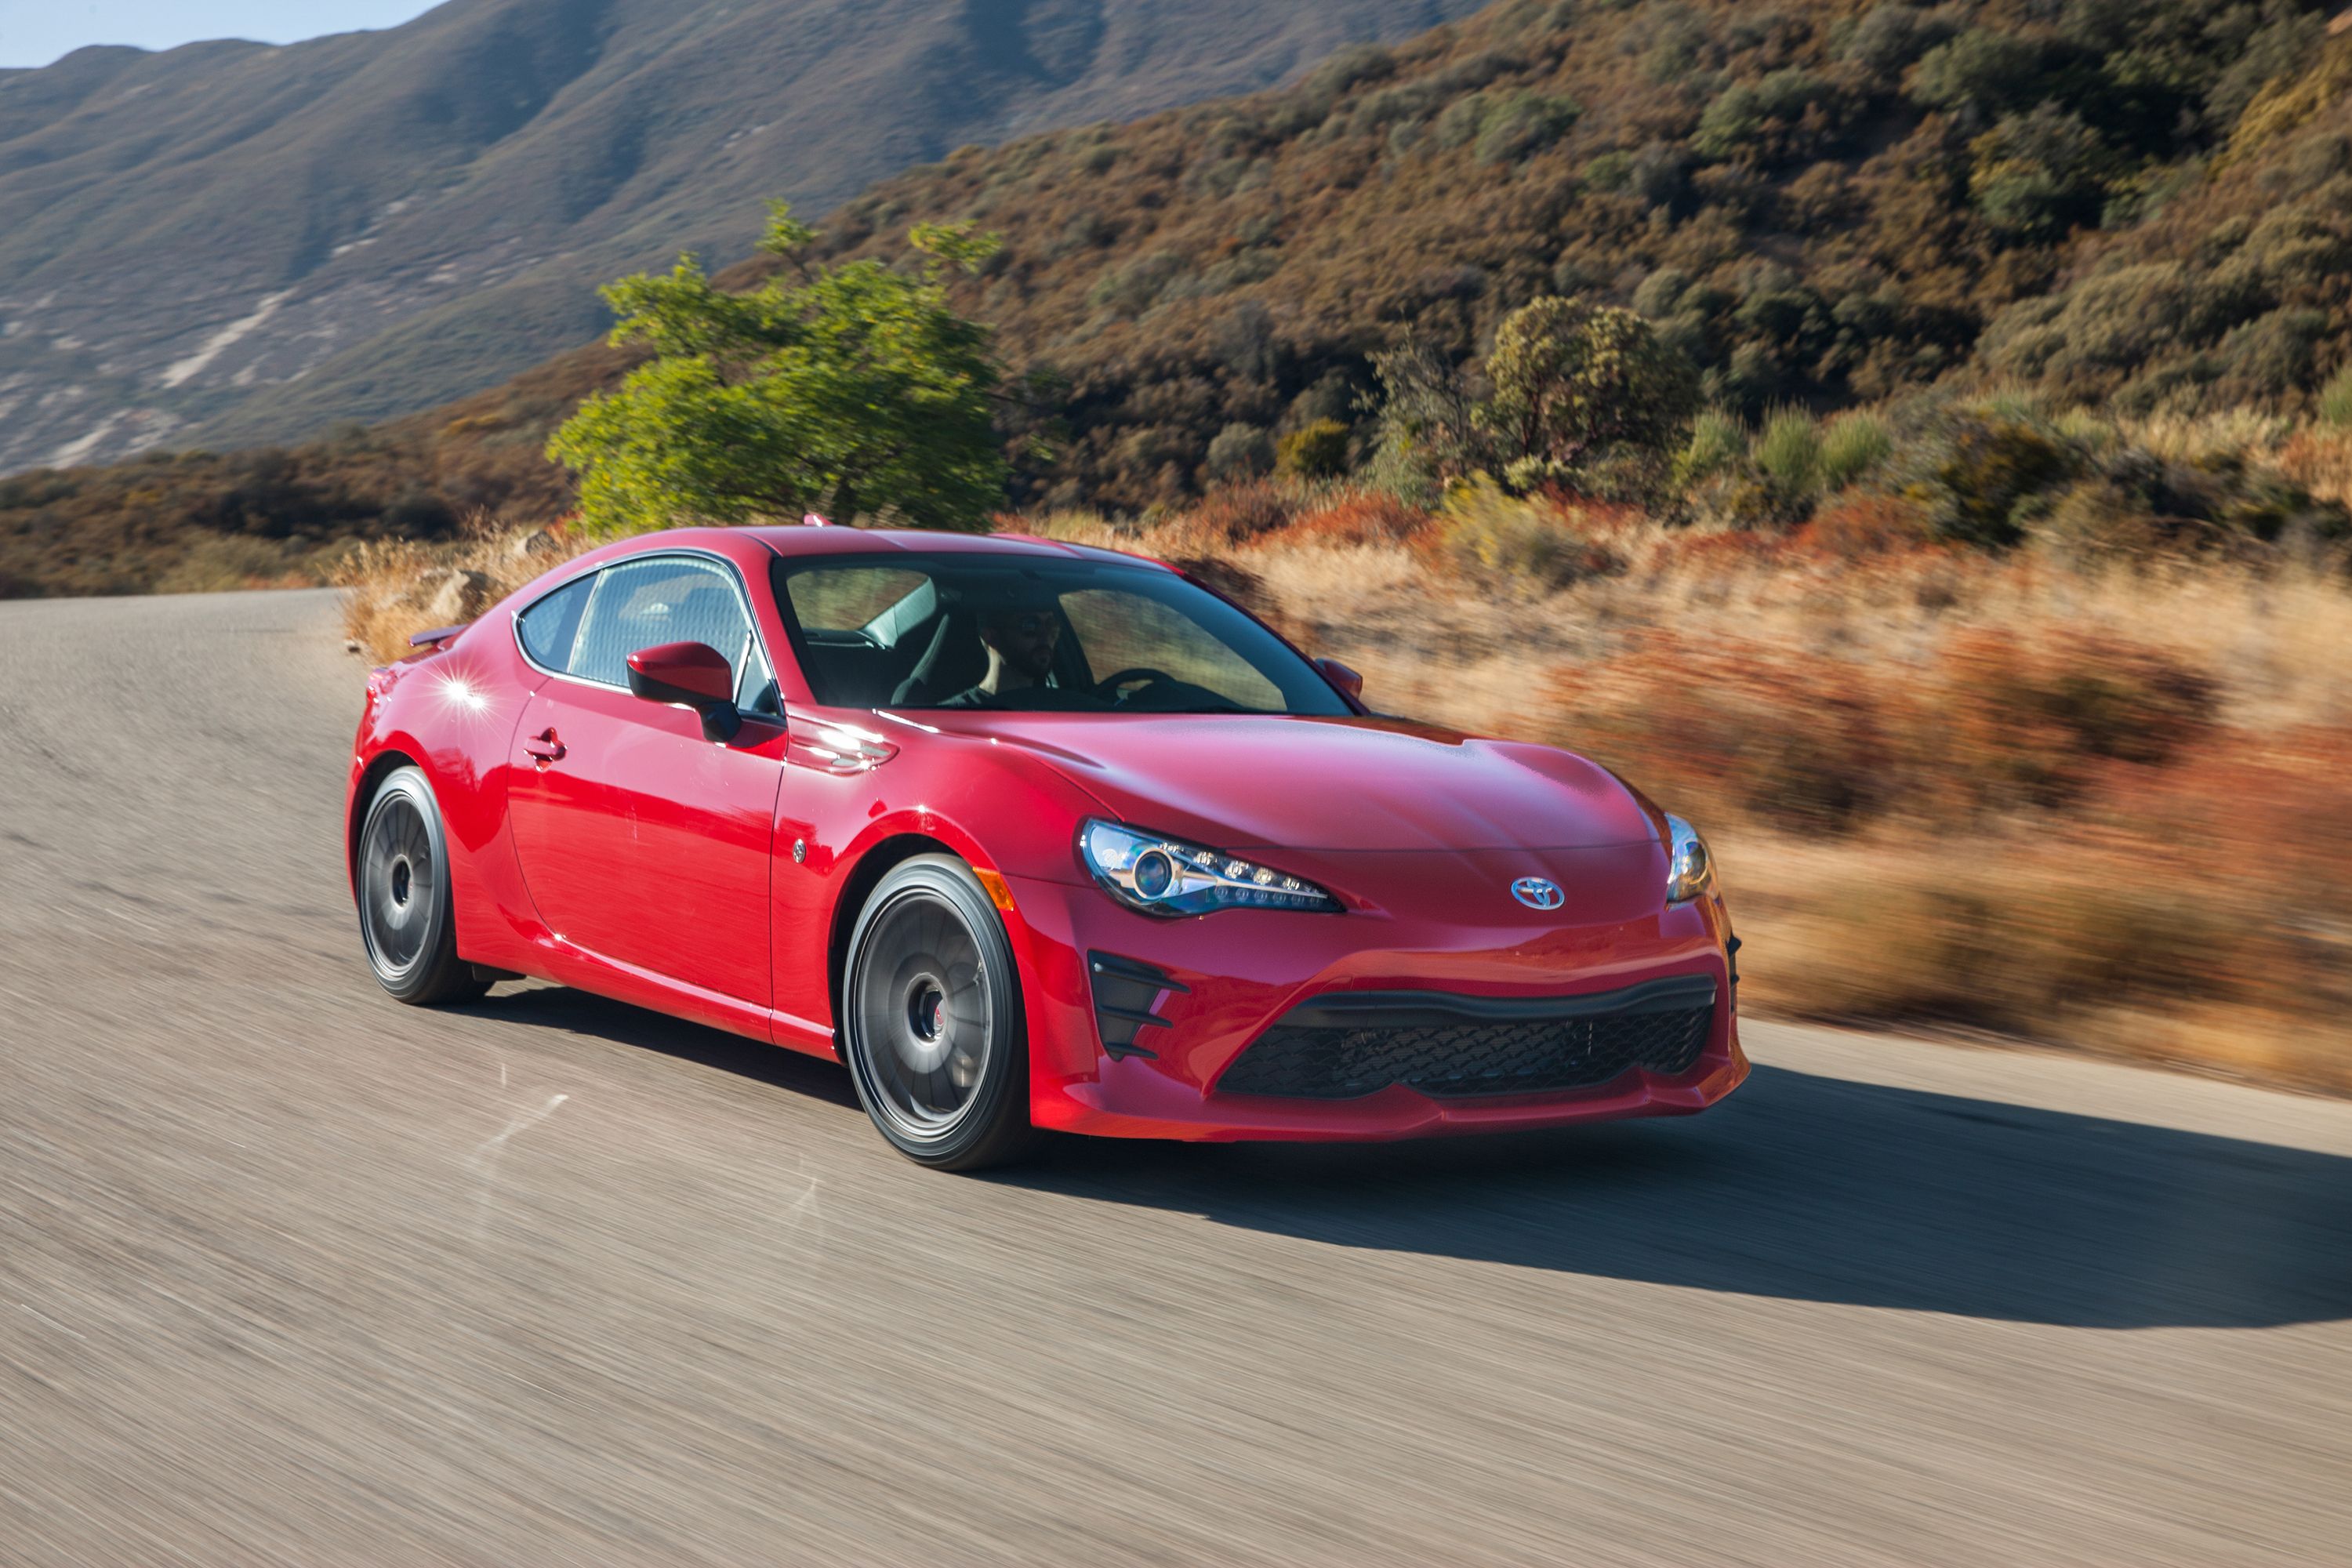 2019 Rumors Say the Next-Gen Subaru BRZ and Toyota 86 Are Cancelled, But Does That Open the Door for a New Toyota MR2? 